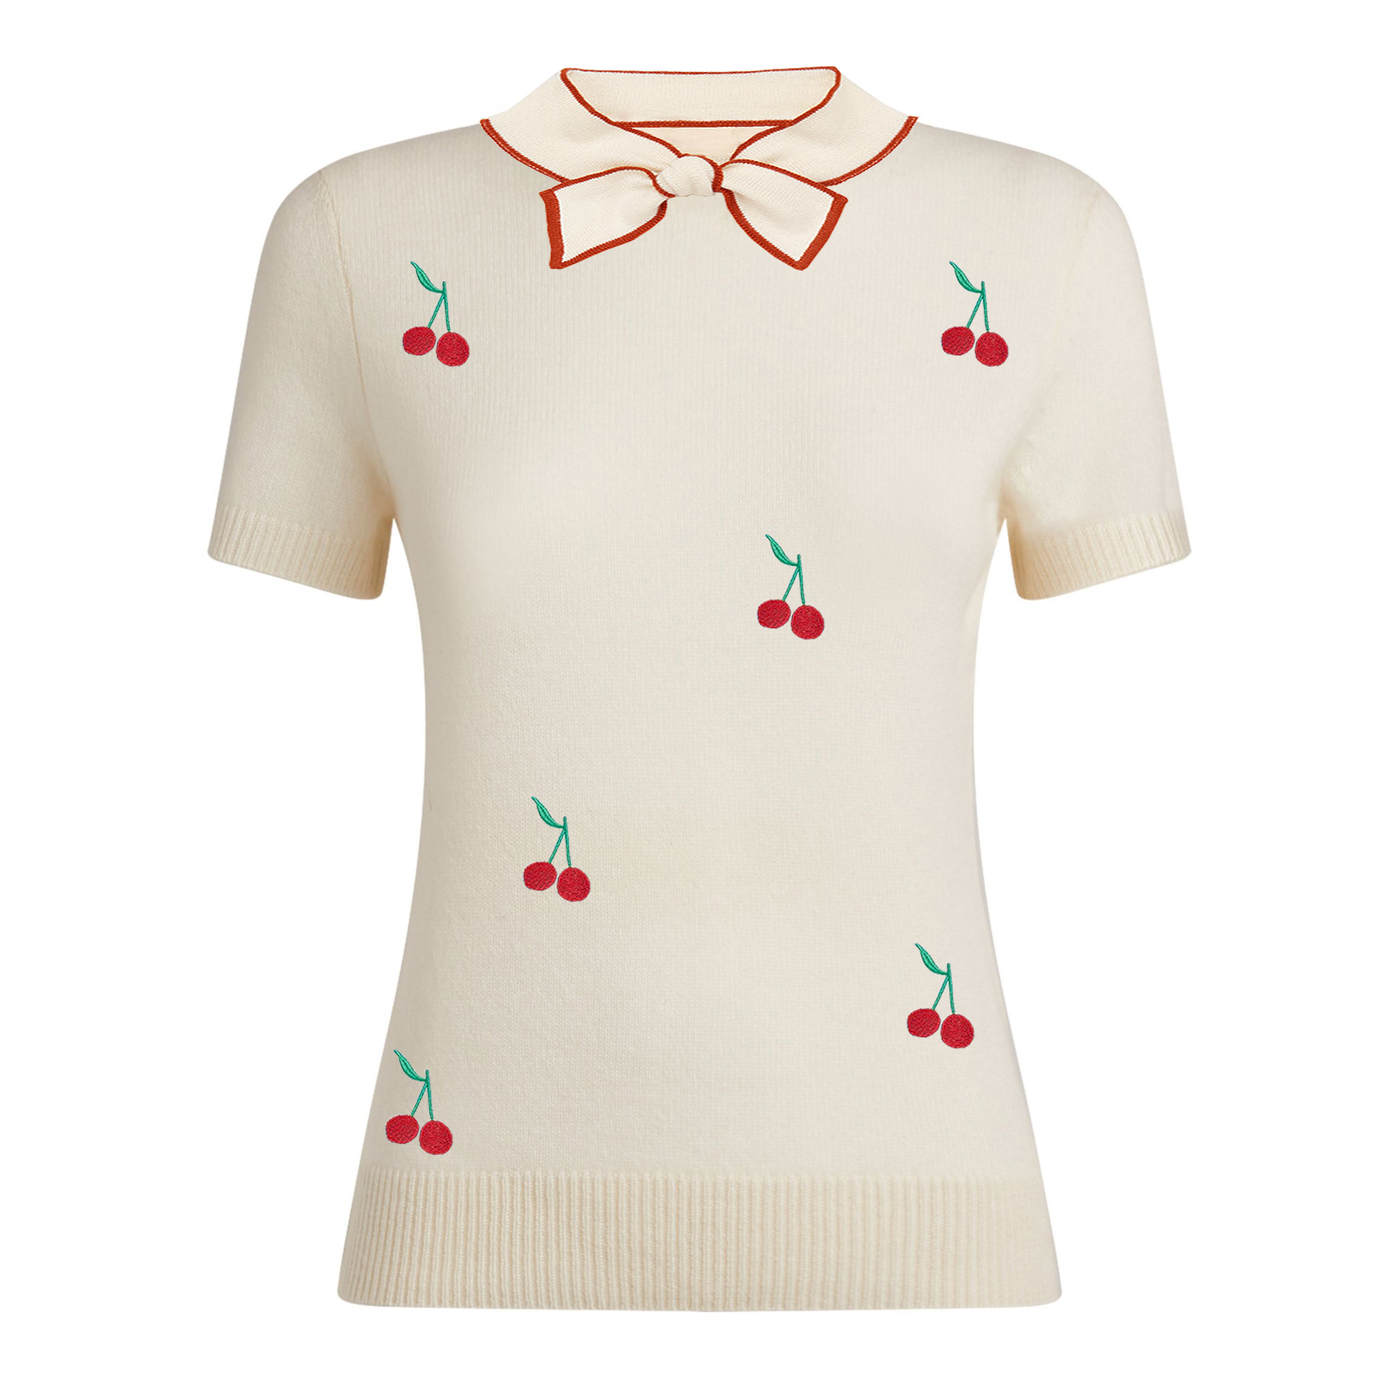 Women's rice apricot cherry embroidered knitted T-shirt